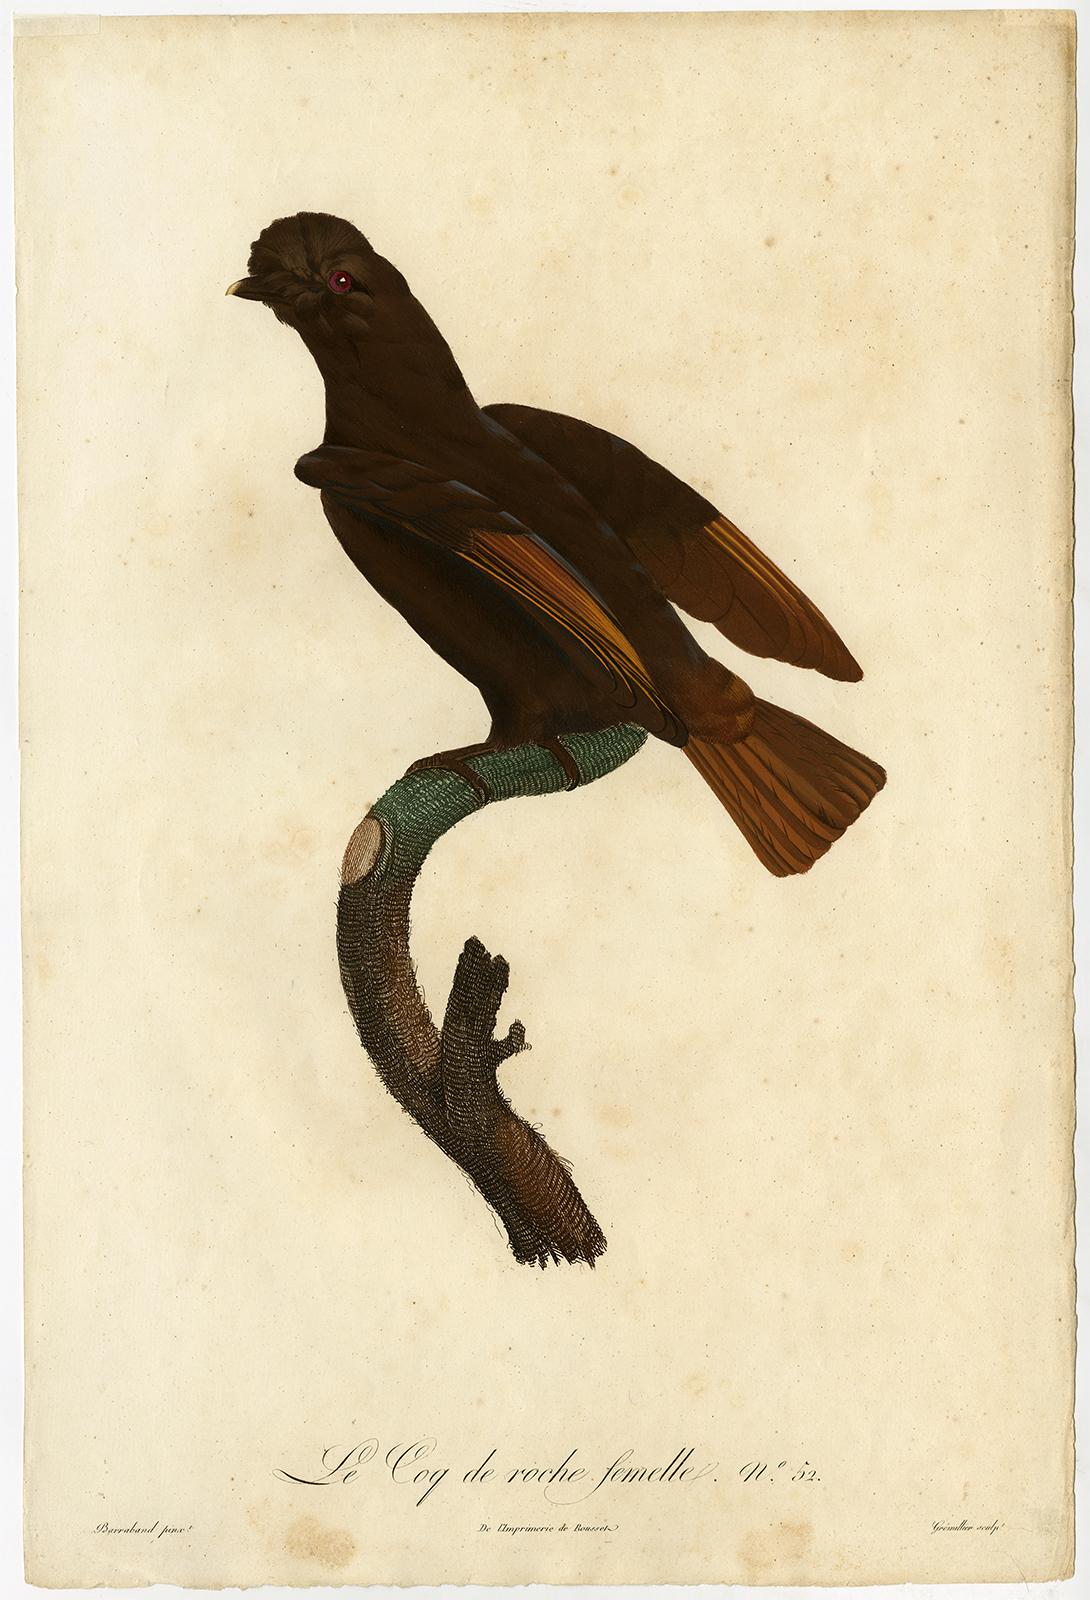 Jacques Barraband Animal Print - Female cock-of-the-rock bird by Barraband - Hand coloured etching - 19th century